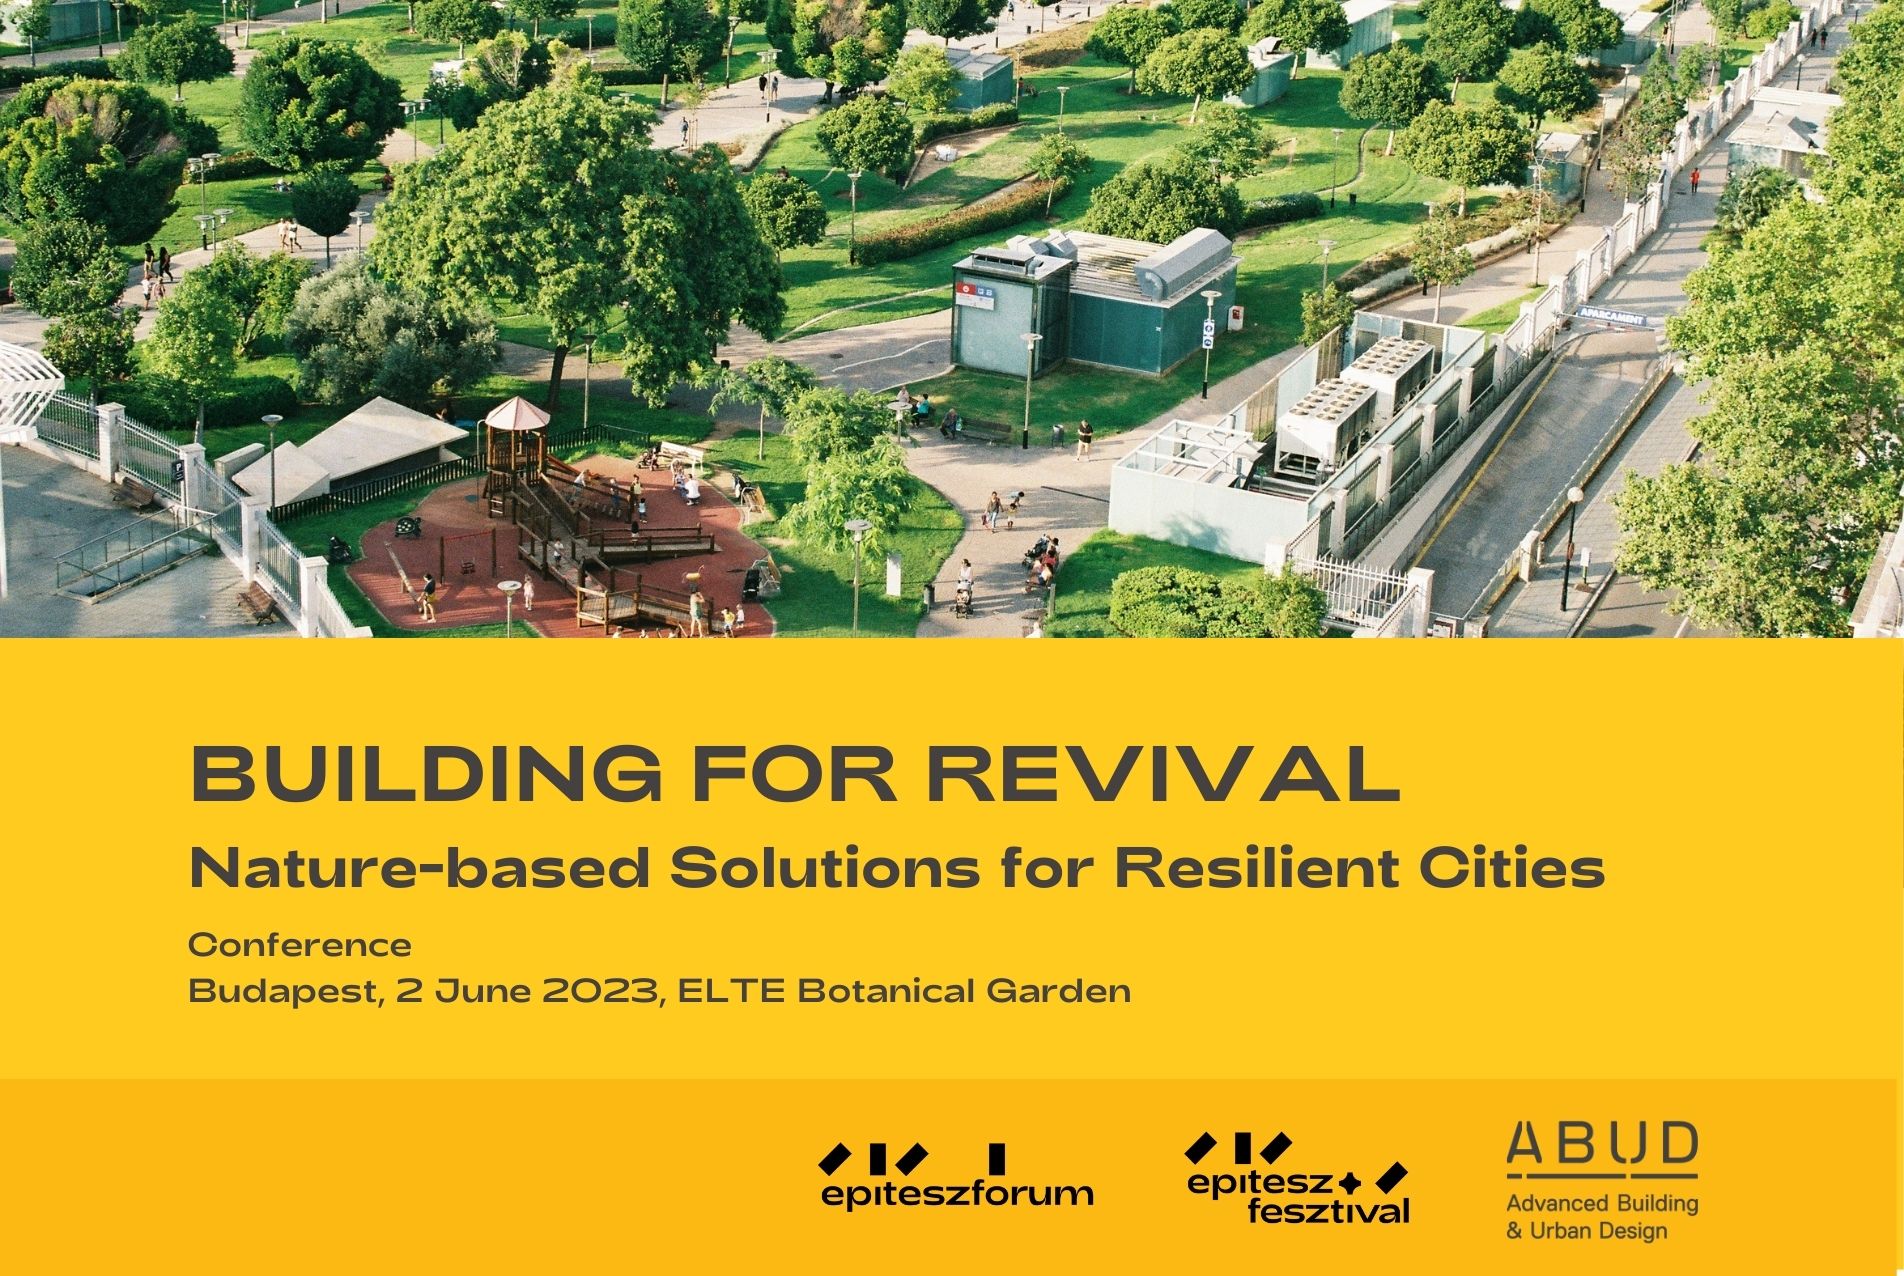 BUILDING FOR REVIVAL: Nature-based Solutions for Resilient Cities Conference